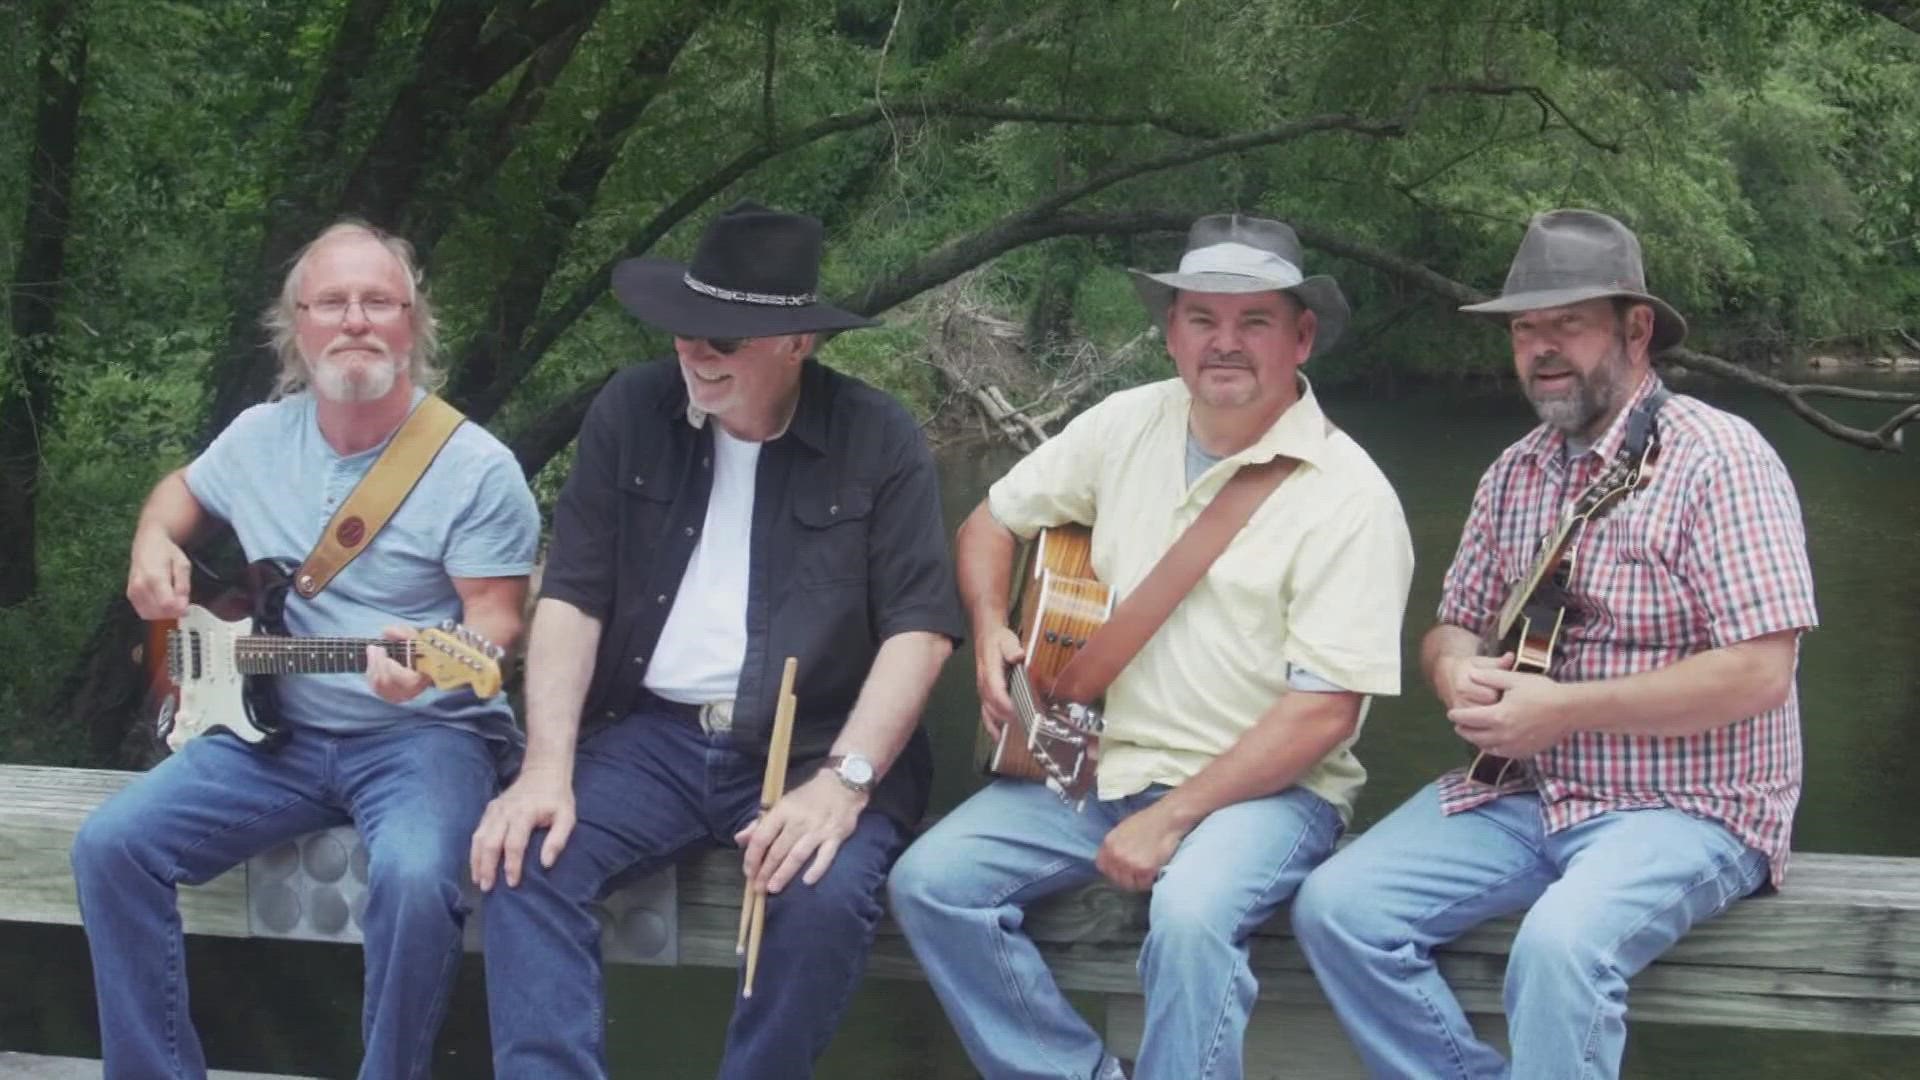 One of the victims of a house fire over the holiday weekend was a member of The Obed River Band. They released some songs as a tribute to one of their band members.